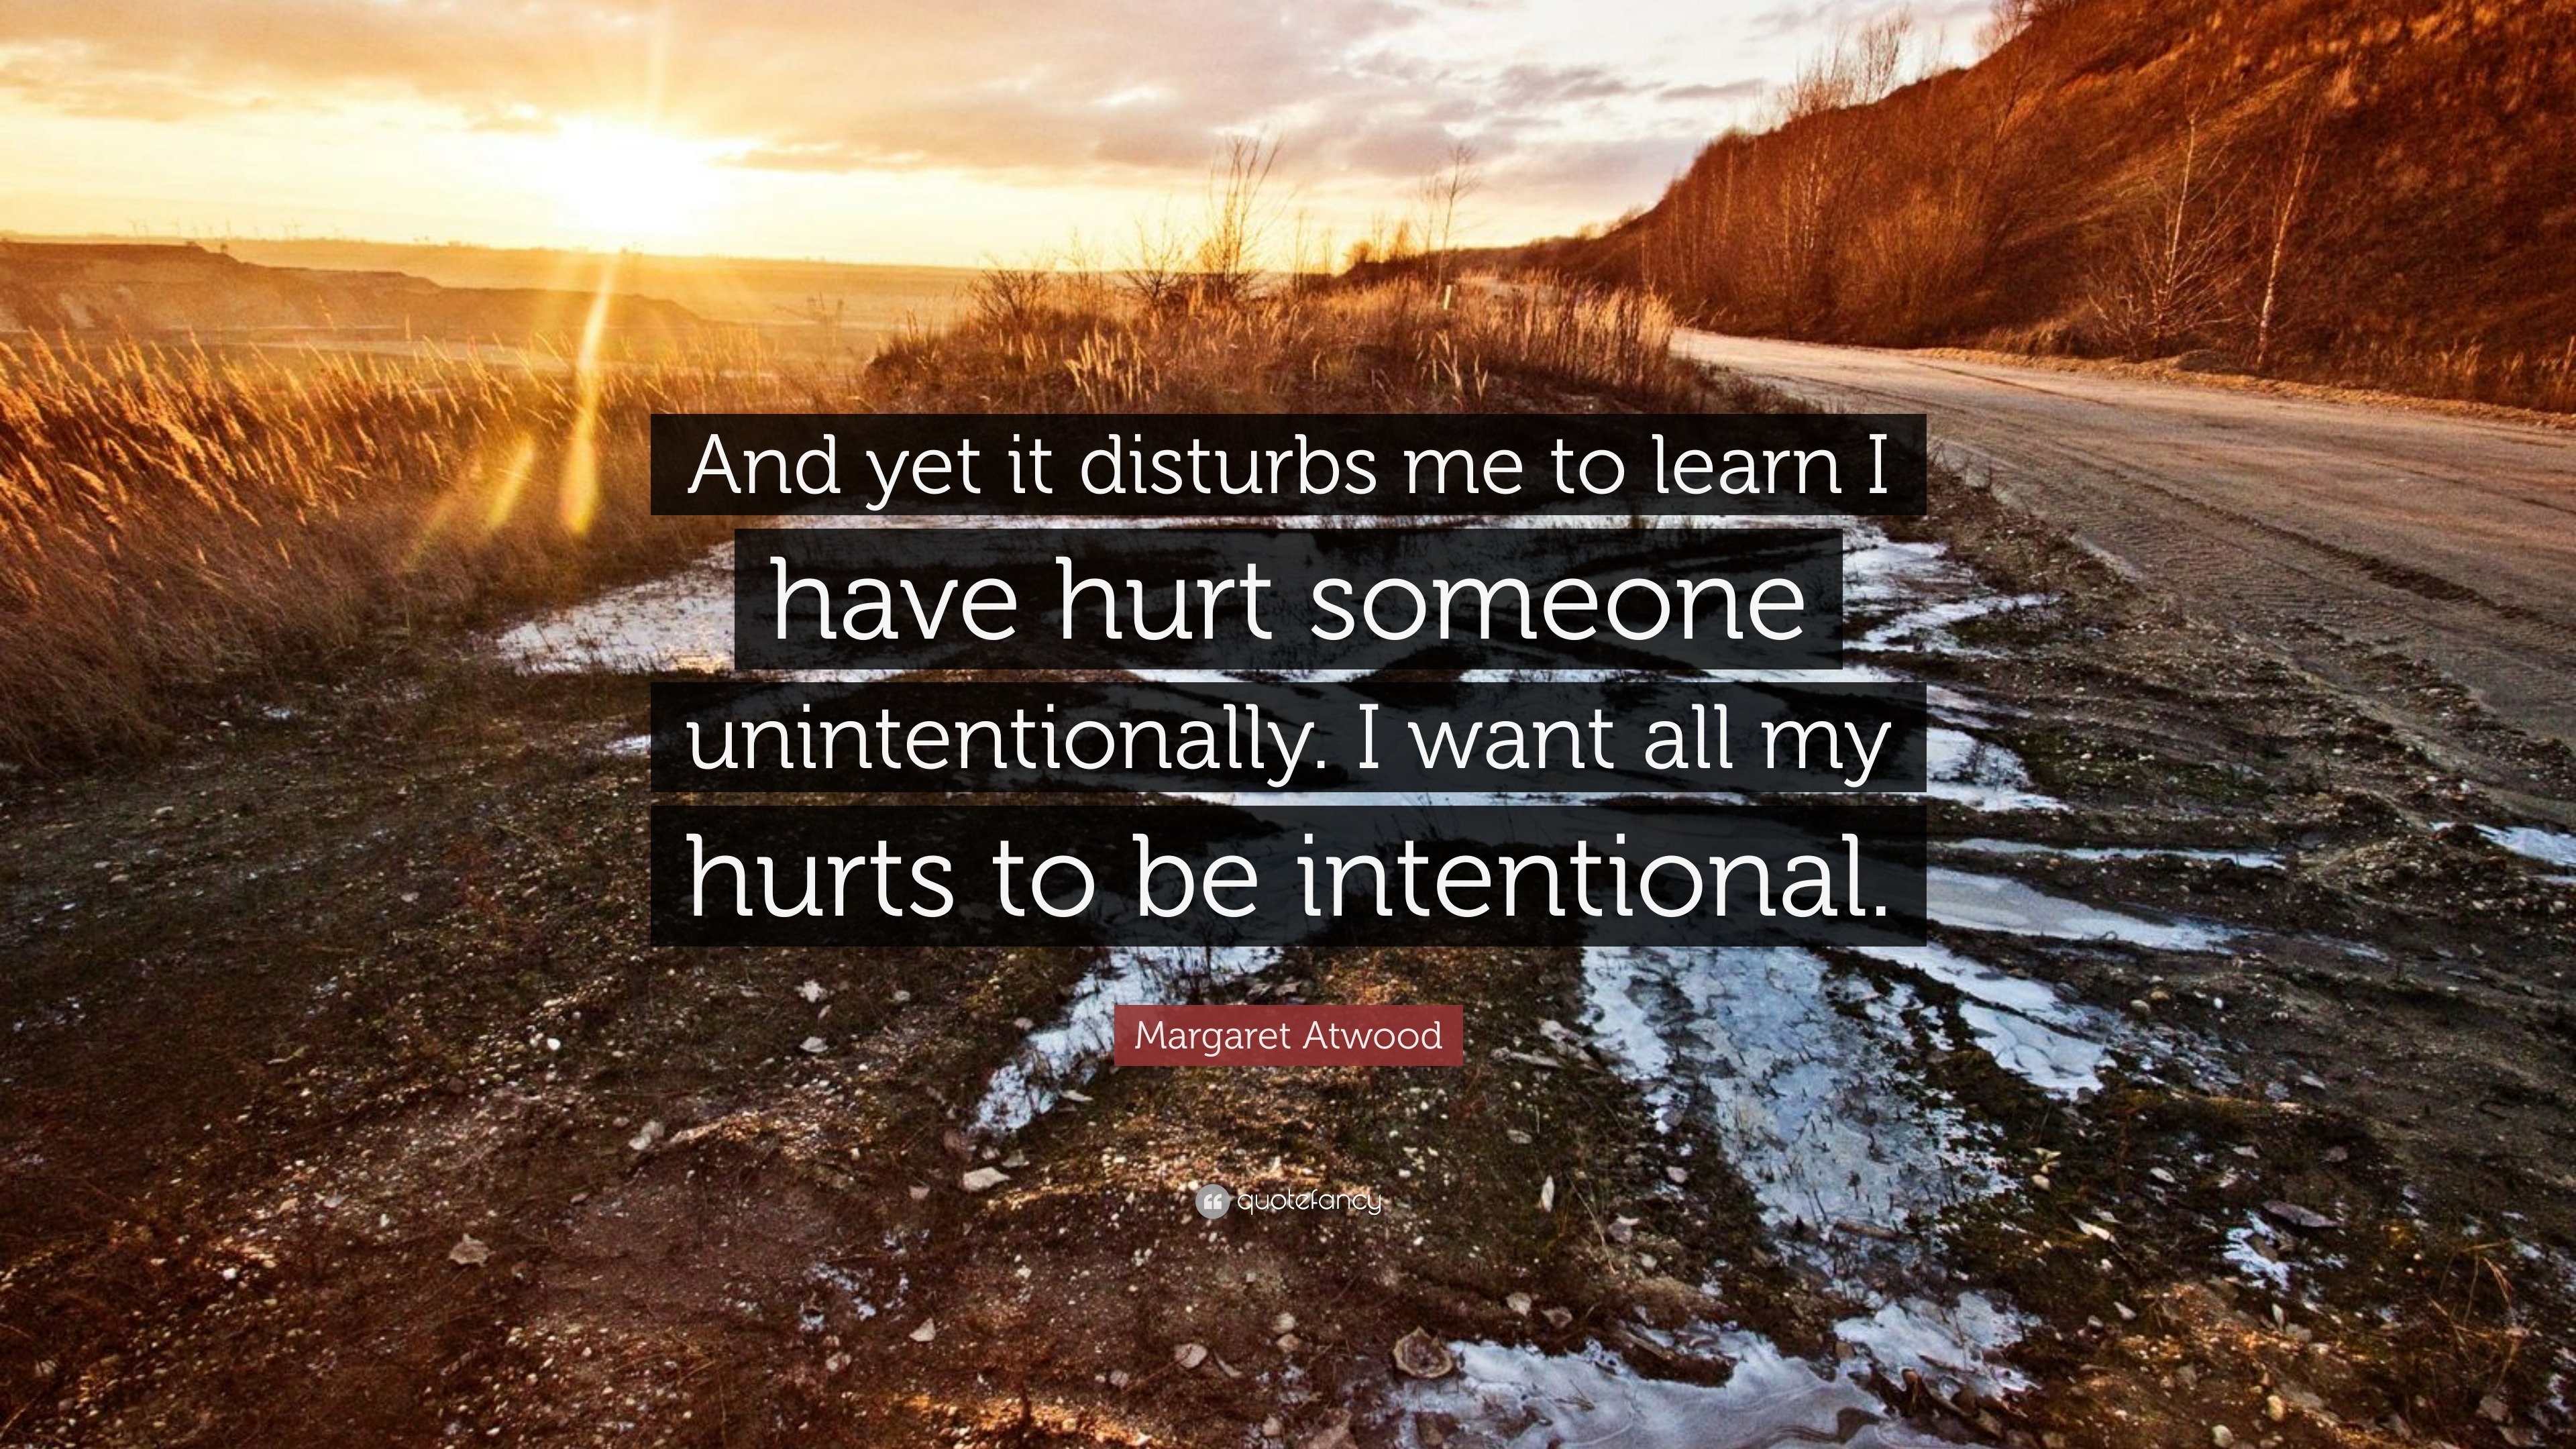 Margaret Atwood Quote “And yet it disturbs me to learn I have hurt someone